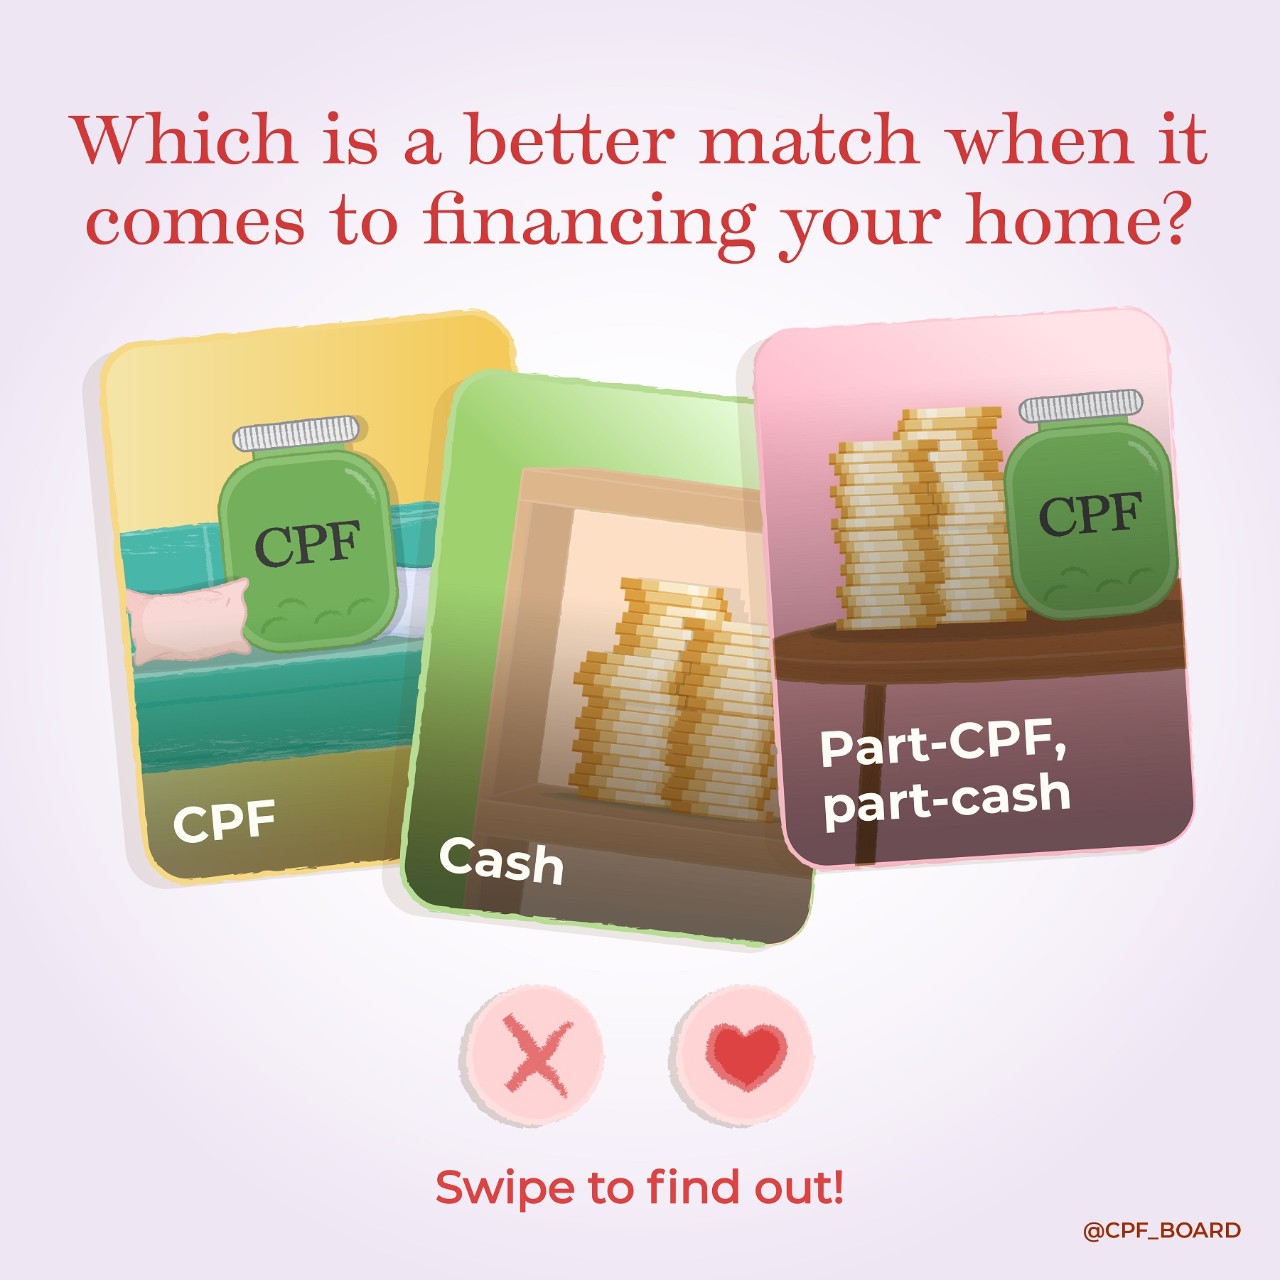 which is a better match when it comes to financing your home?